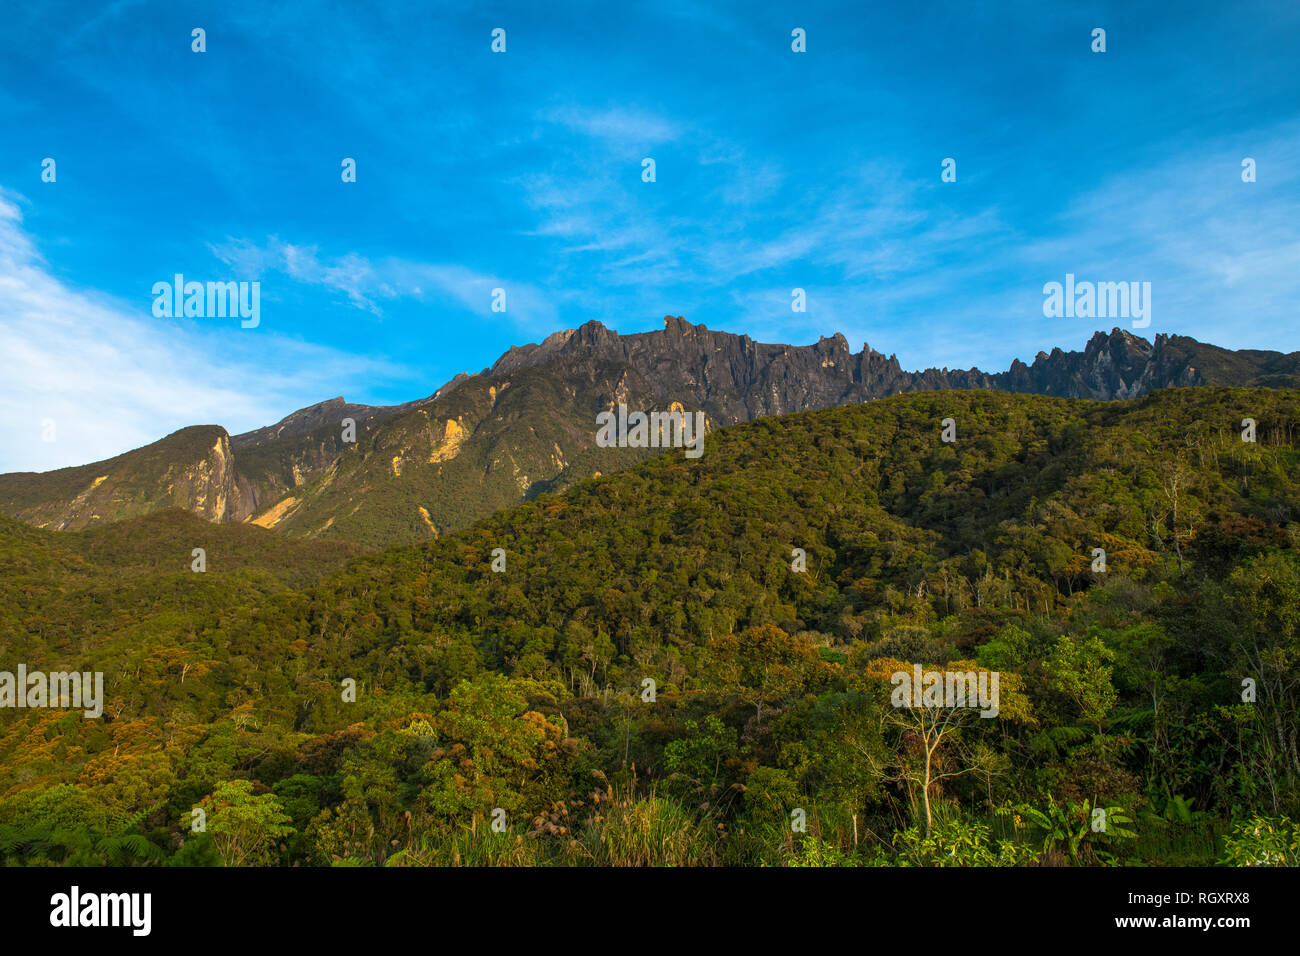 Mount Kinabalu peaks and rainforest covered slopes in dawn light, from Mesilau, Sabah, Borneo, Malaysia. Stock Photo